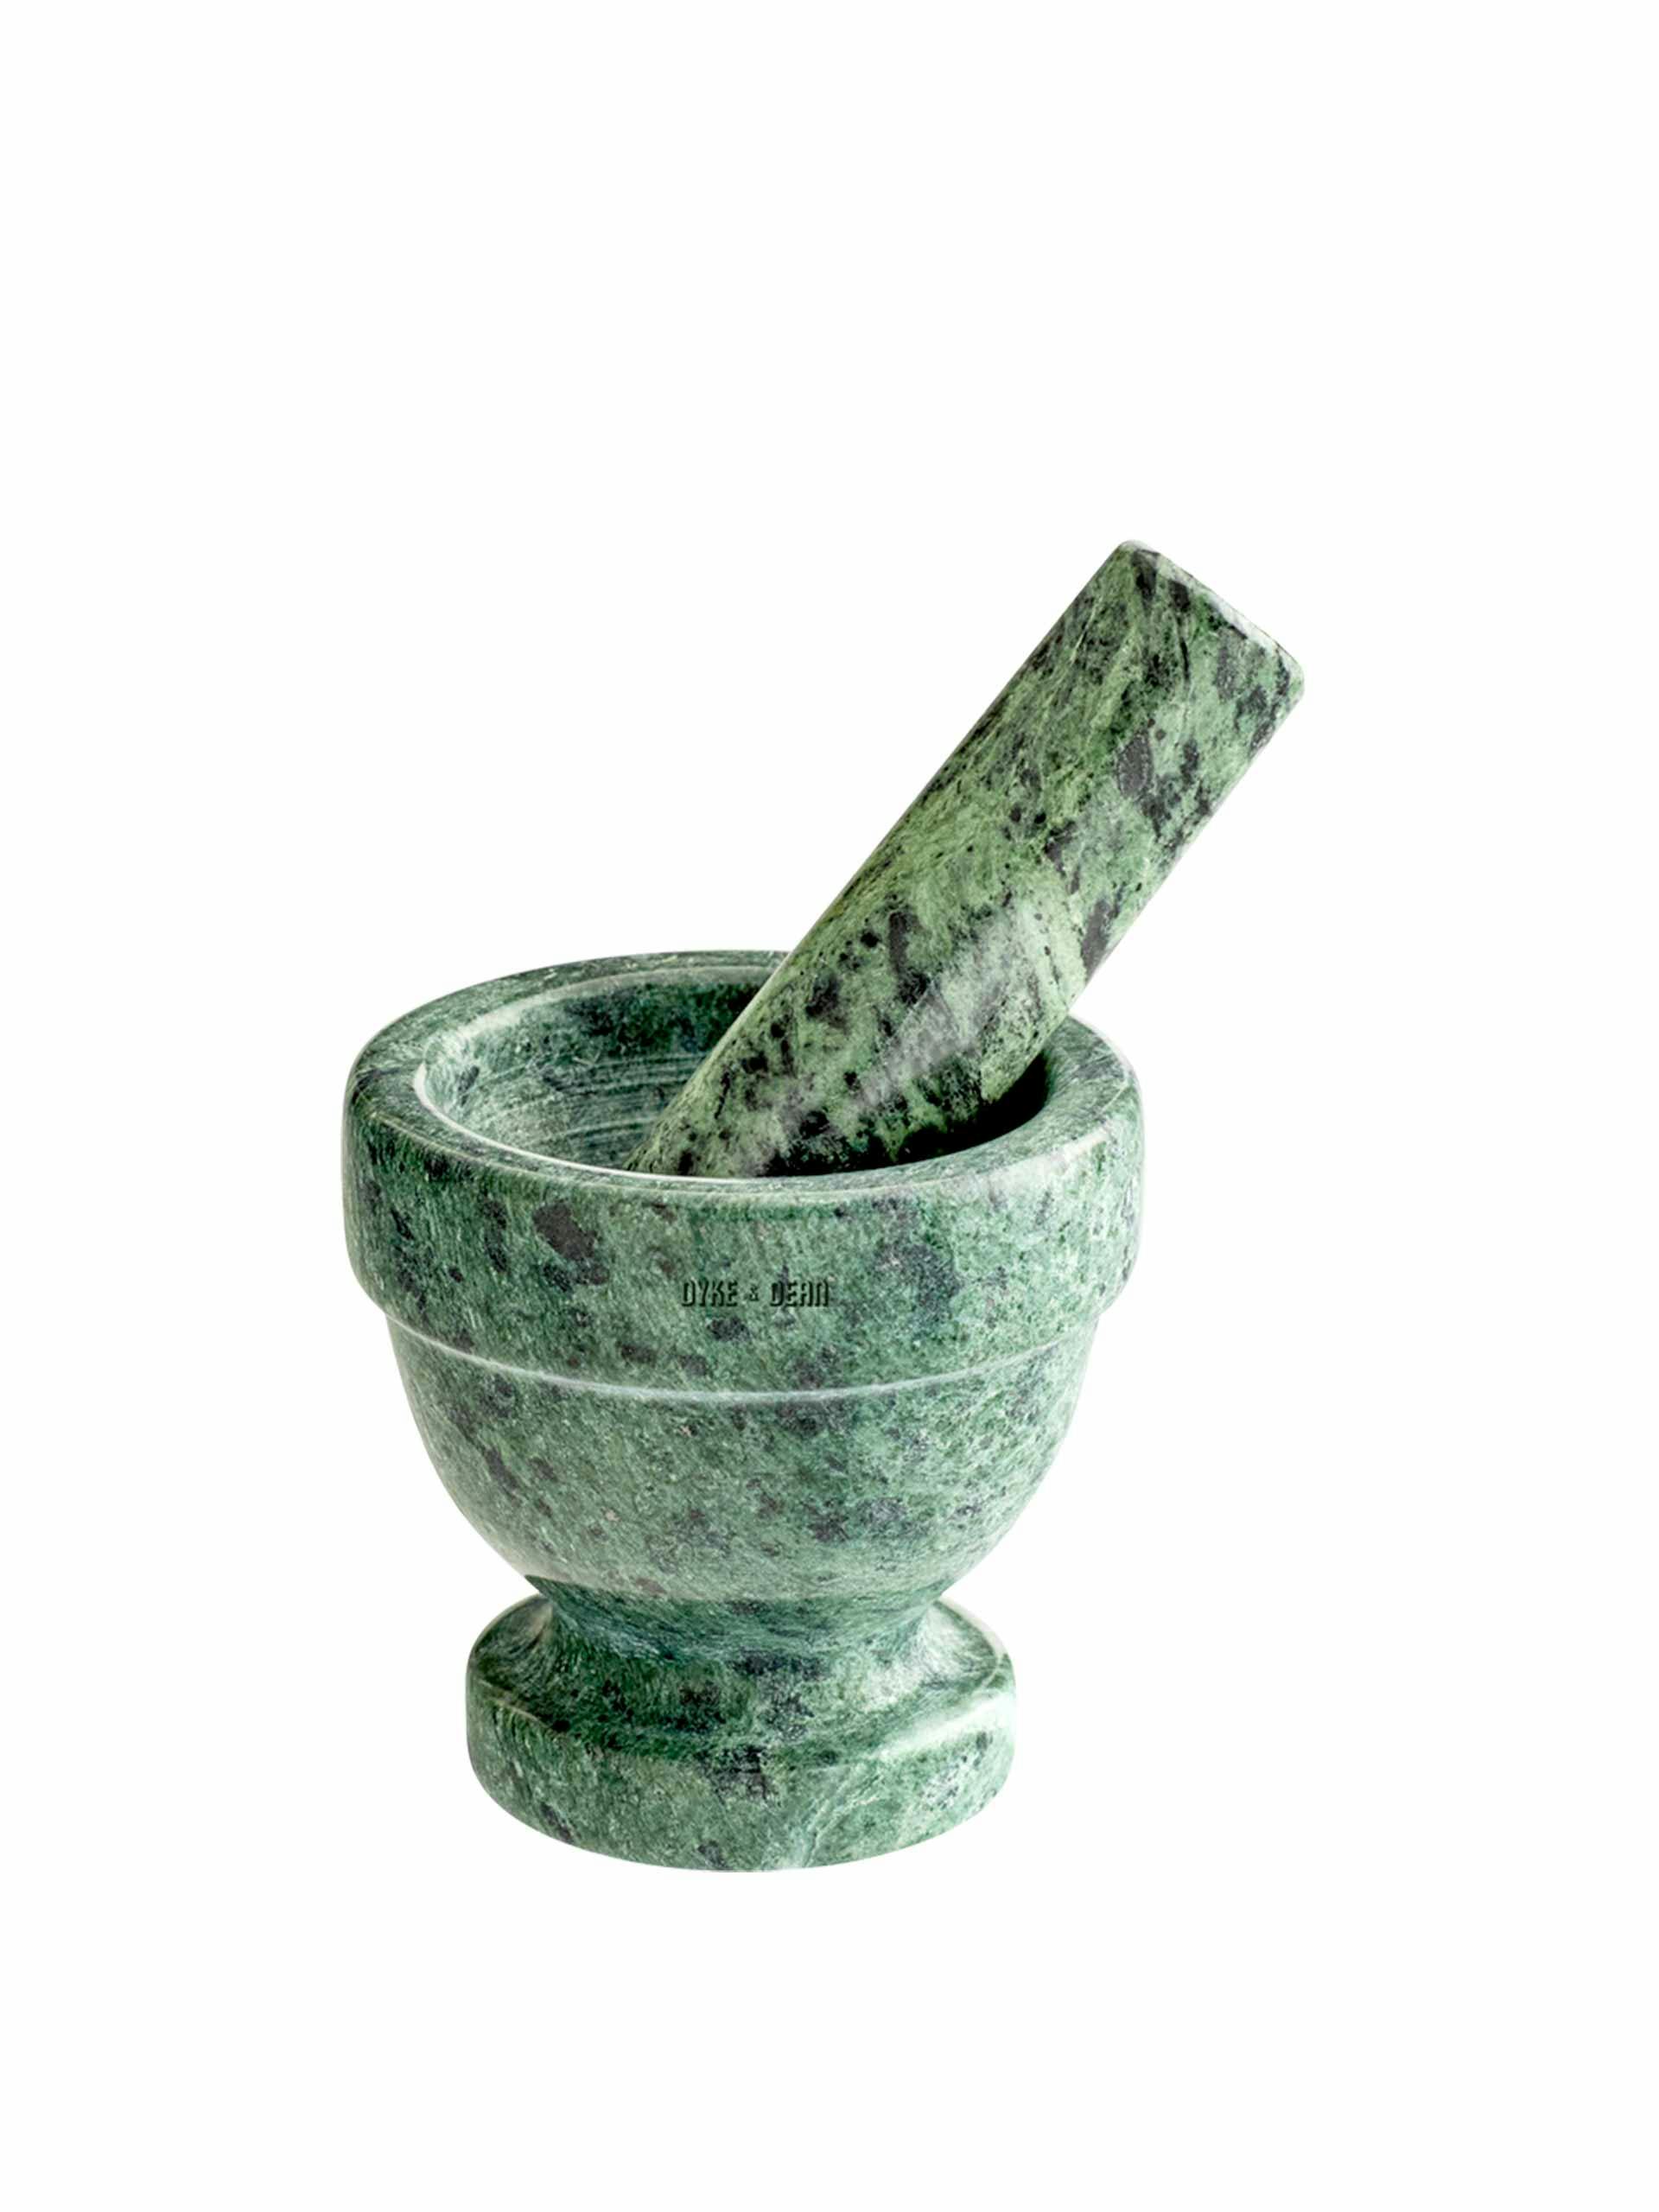 Green marble pestle and mortar